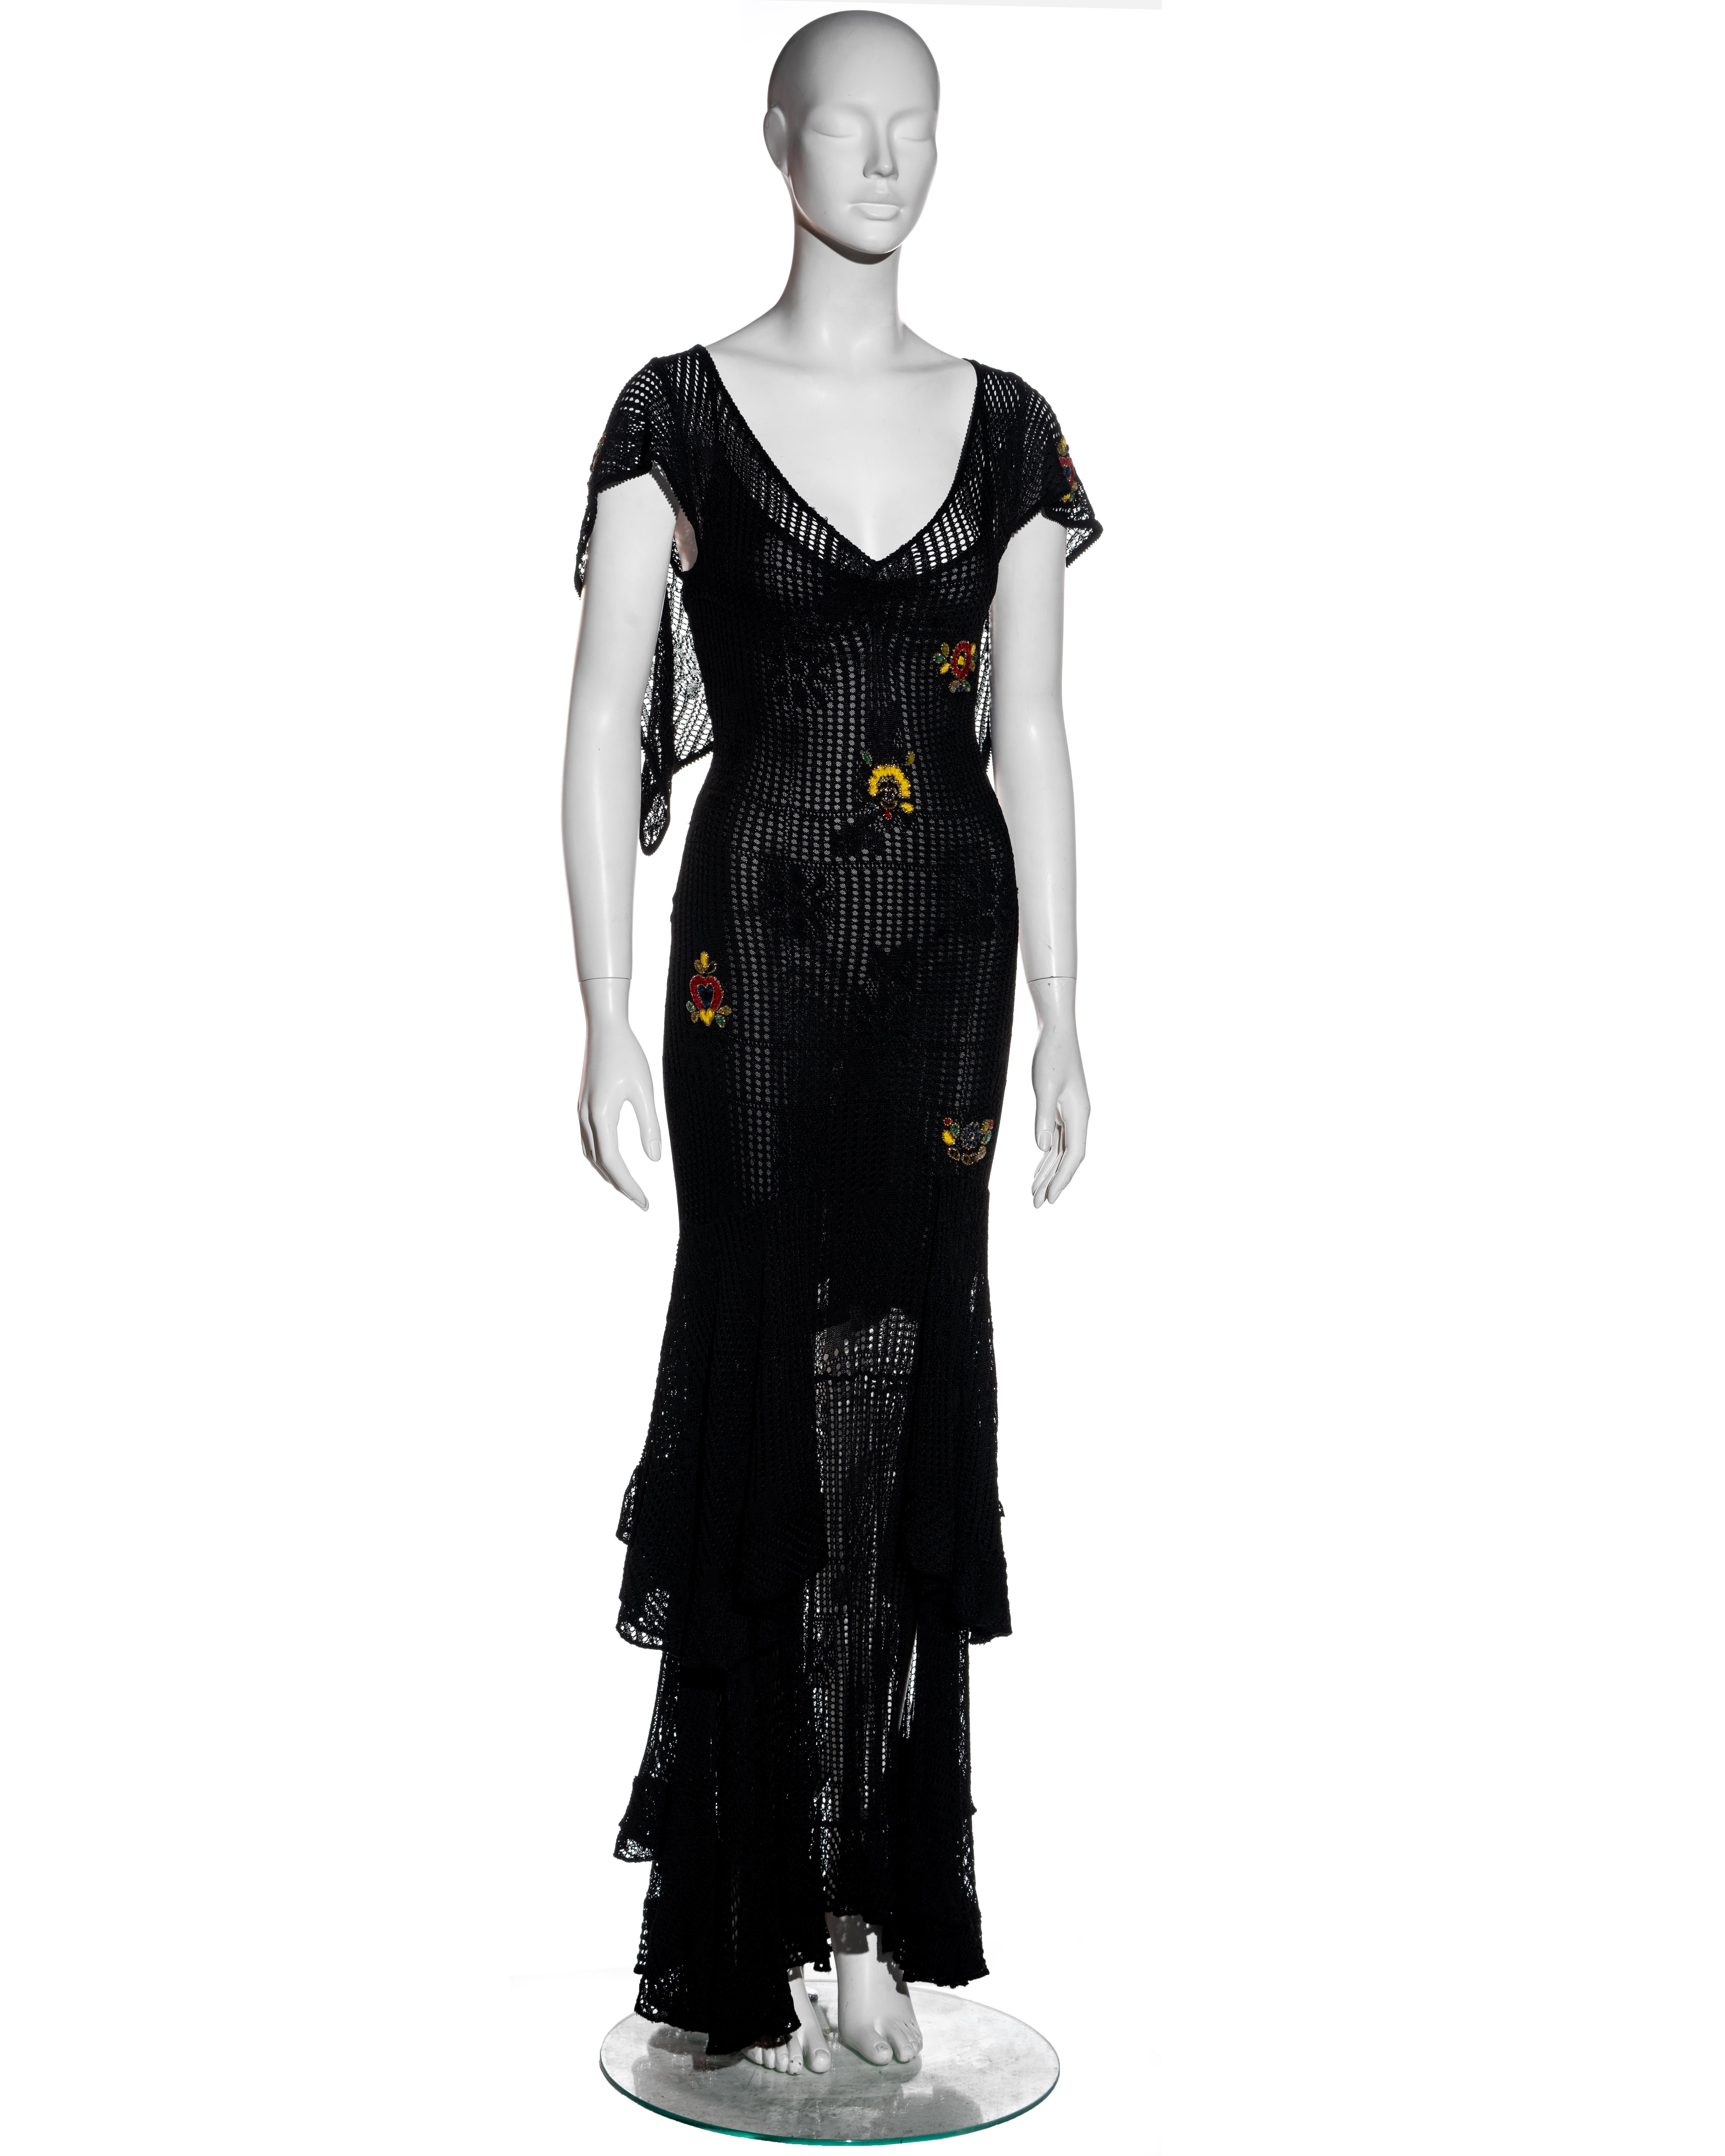 ▪ Christian Dior black crochet maxi dress
▪ Designed by John Galliano 
▪ Tiered maxi skirt 
▪ Hanging panels at the shoulders 
▪ Beaded chenille appliques 
▪ Attached slip dress 
▪ FR 40 - UK 12 - US 8
▪ Fall-Winter 2001